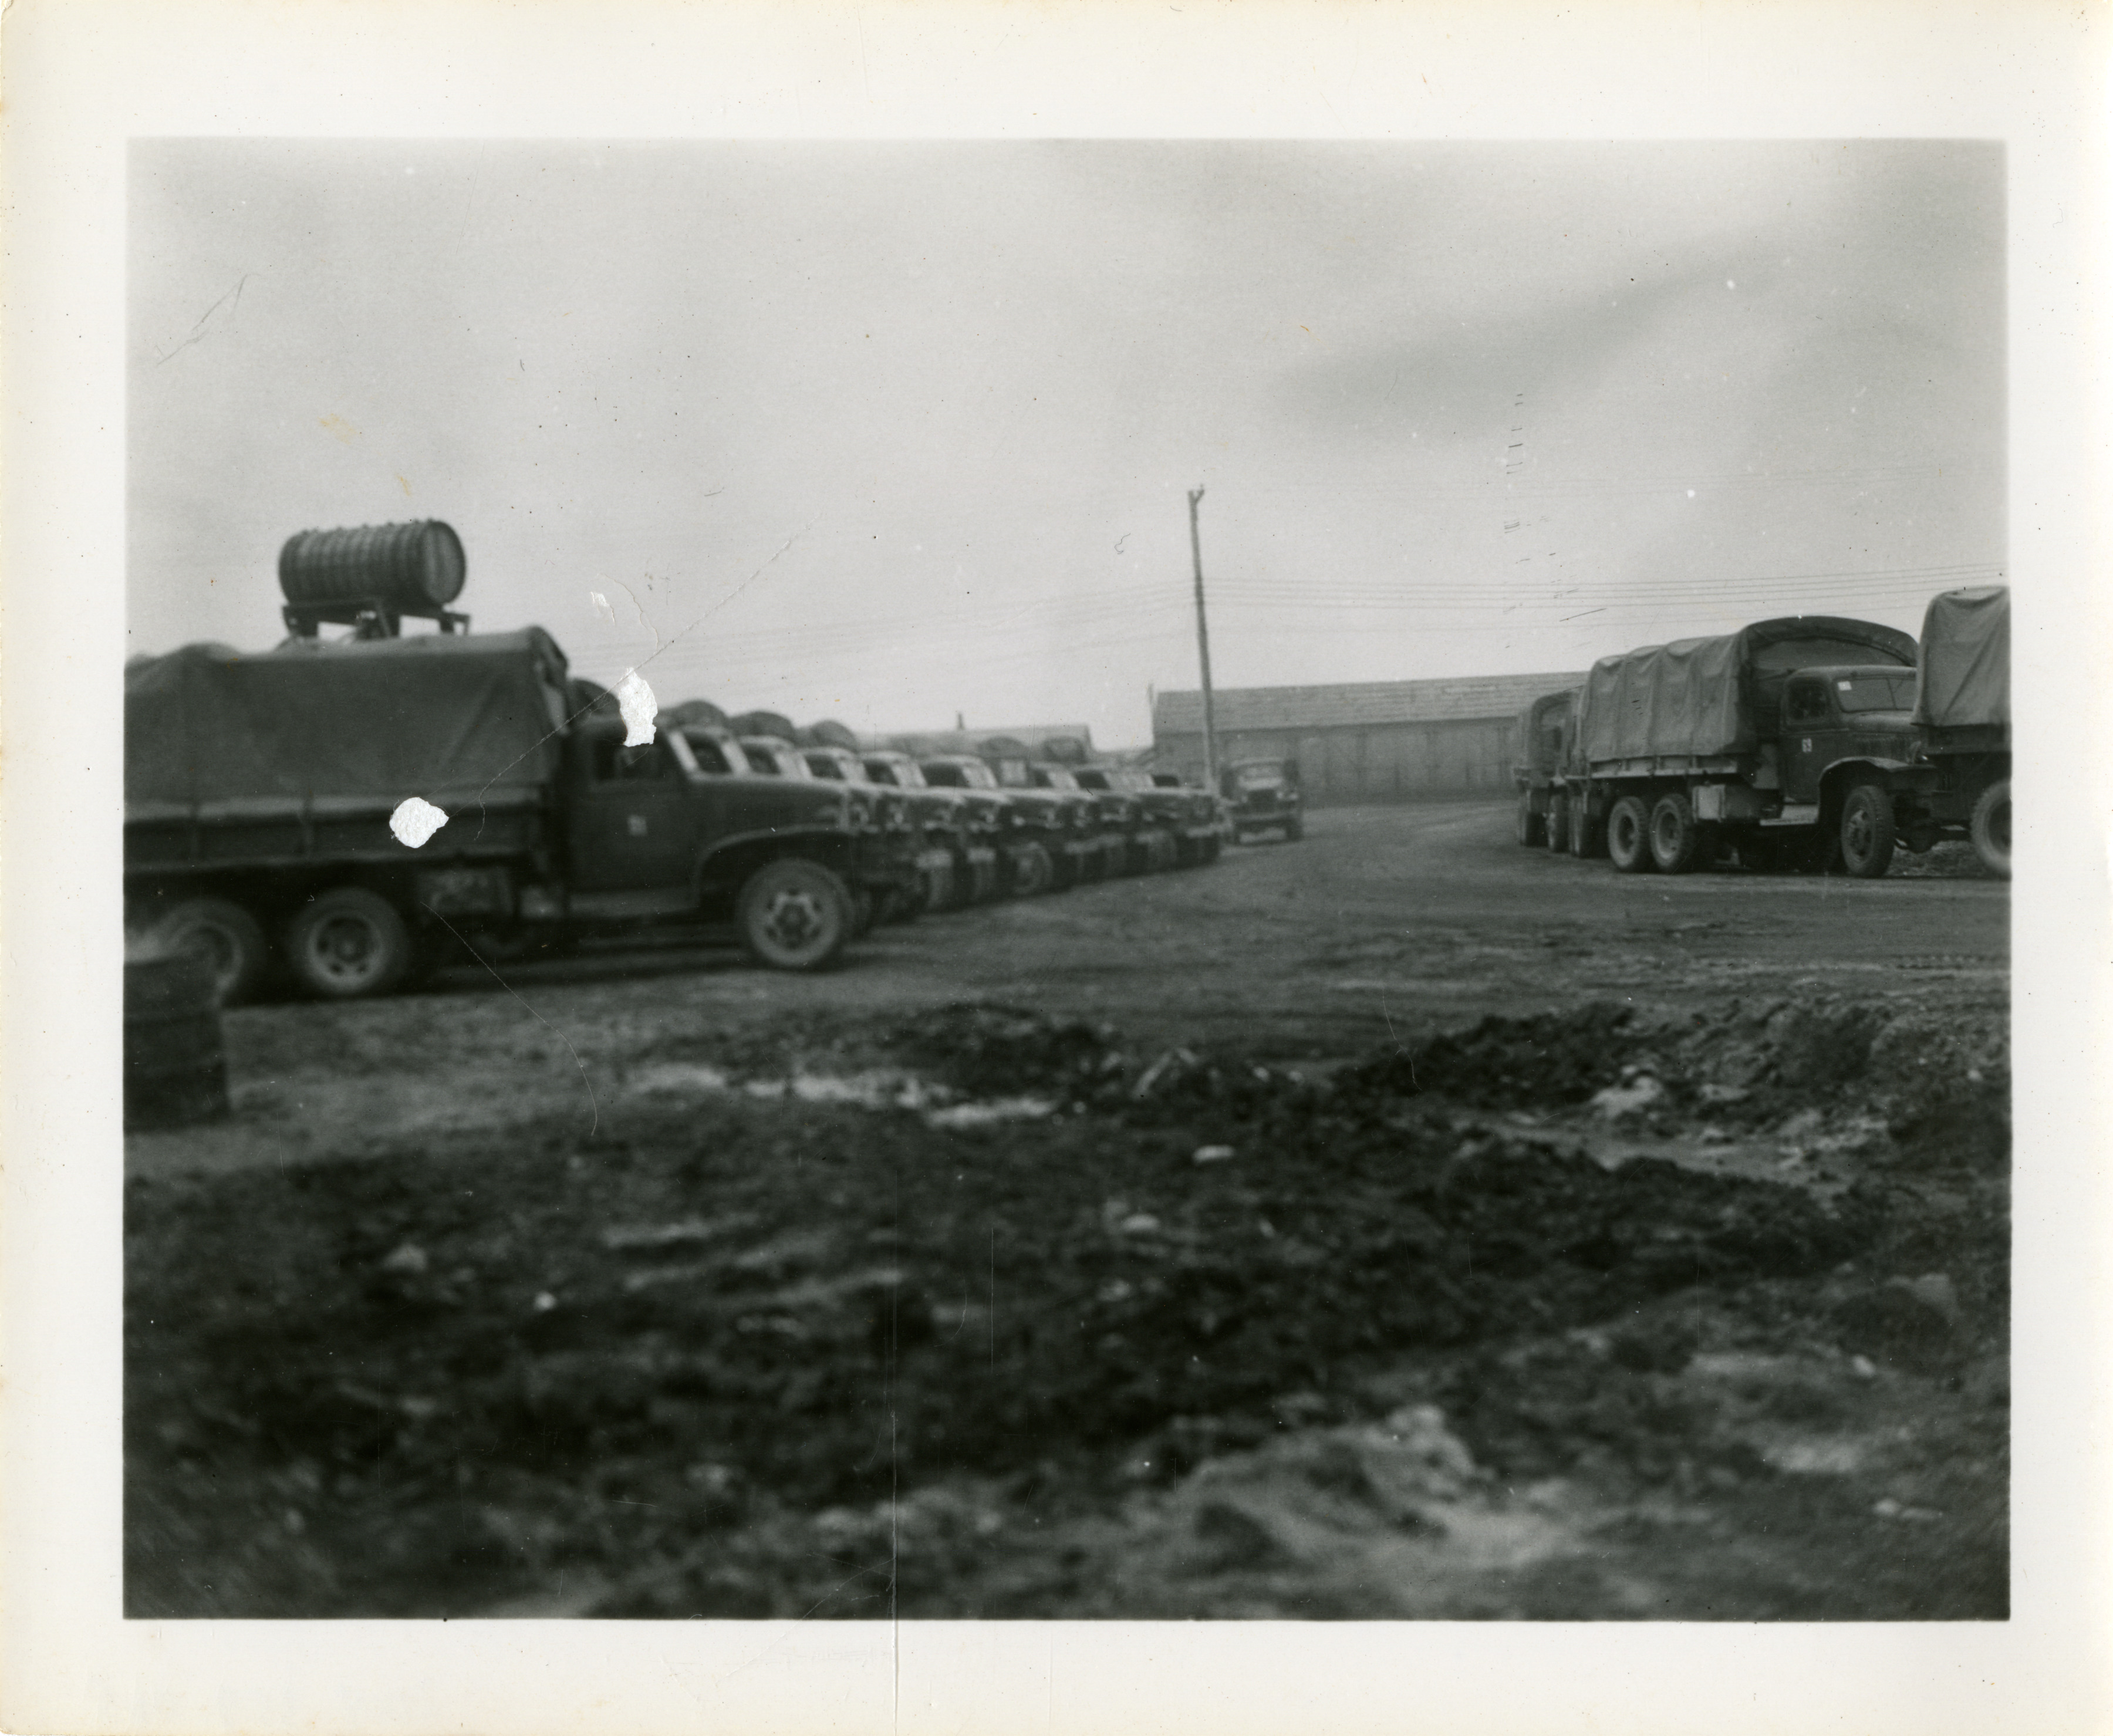 Military Vehicles Are Parked In Rows At The Camp Umnak 1944 The